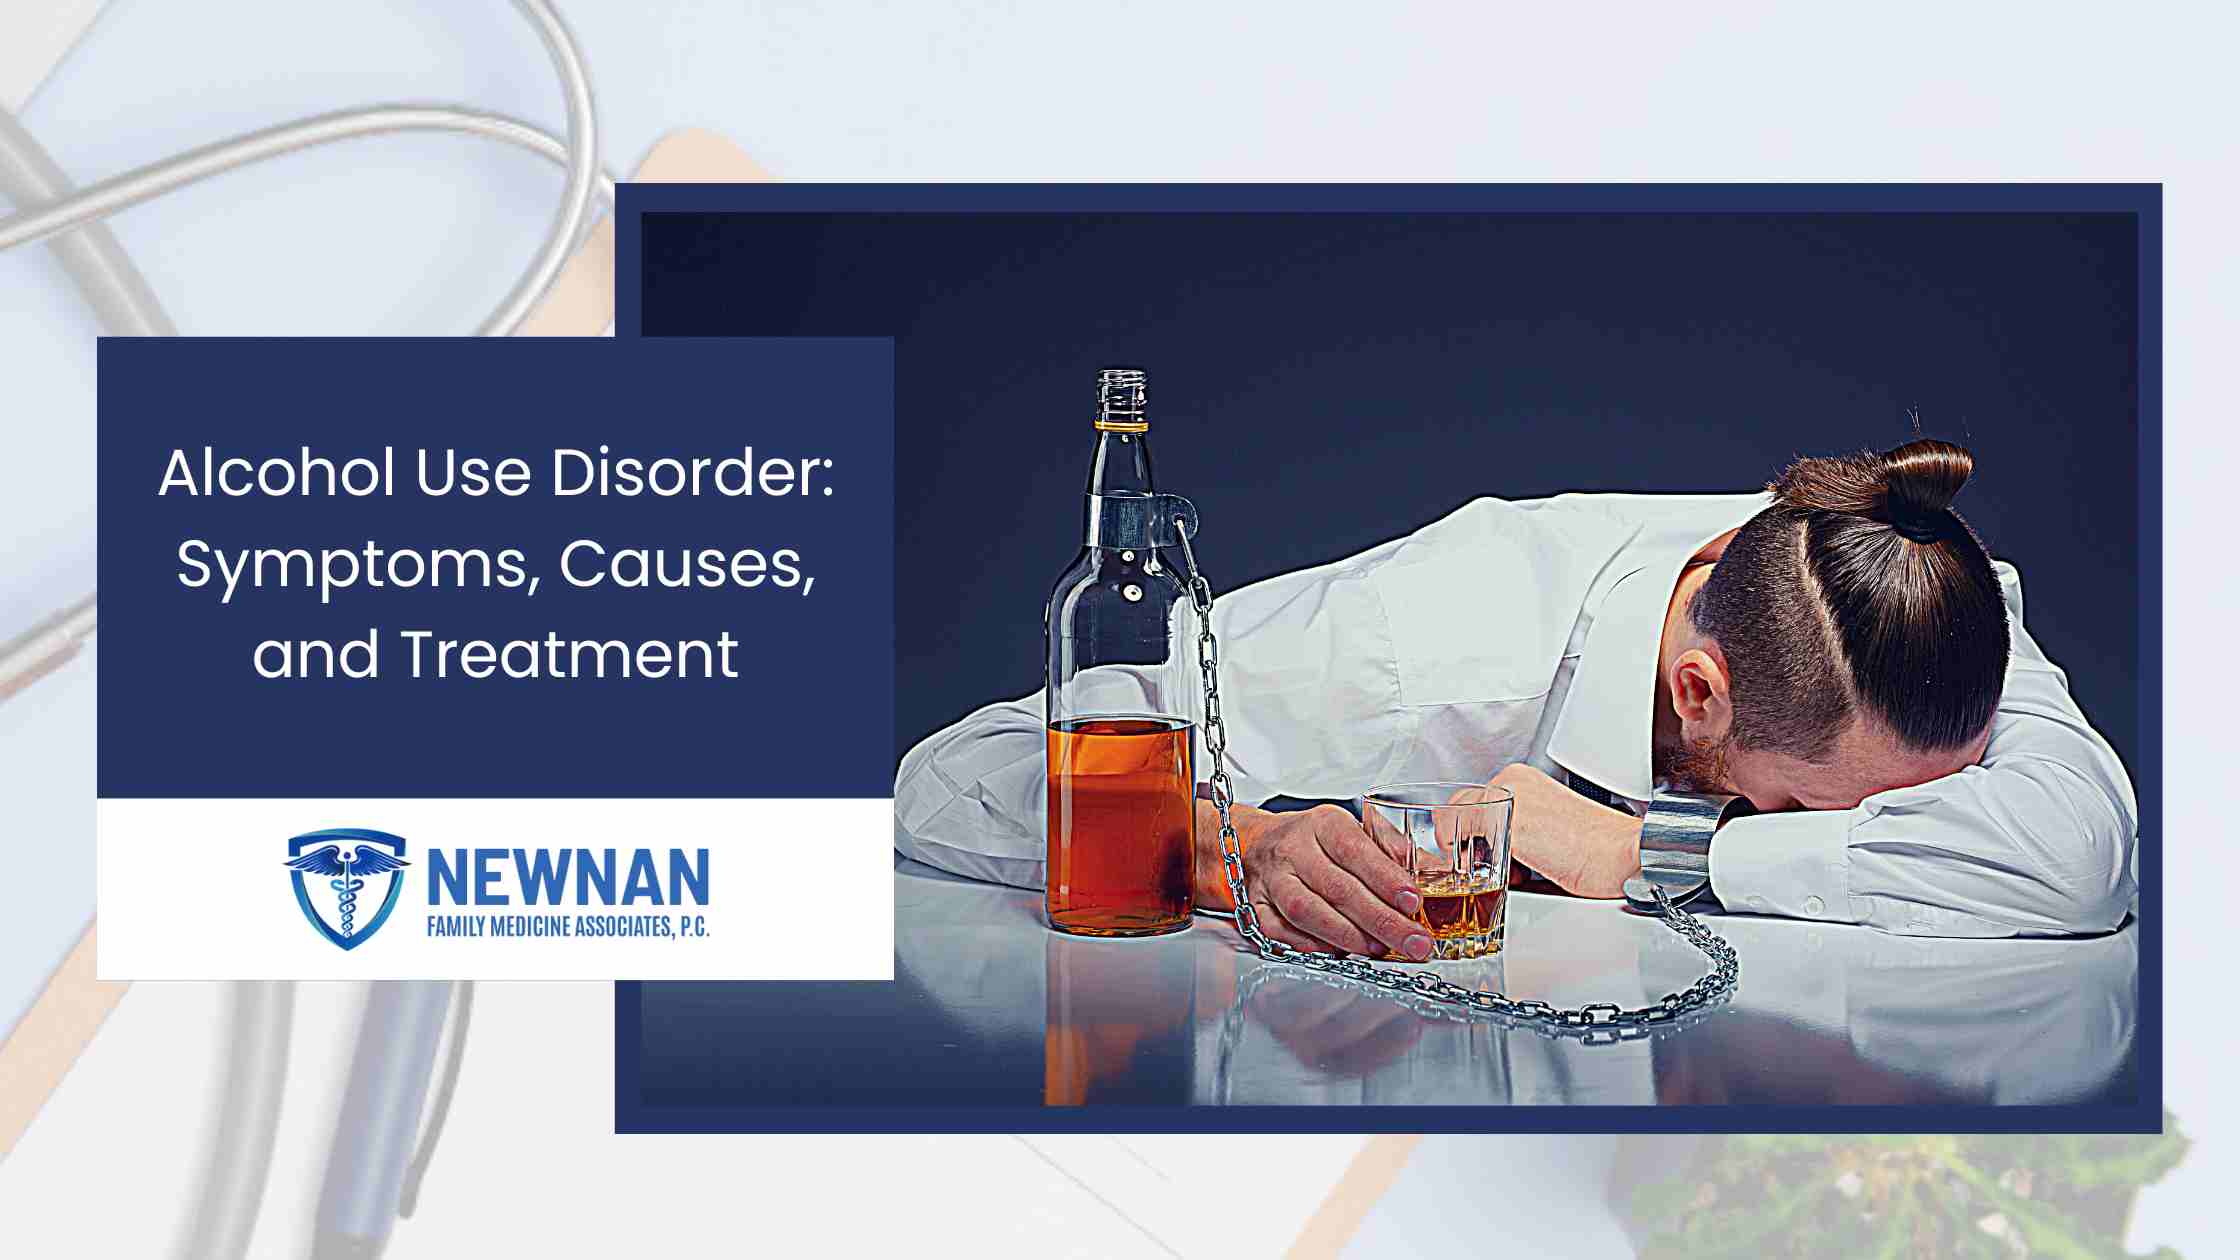 research indicates that alcohol use disorder is caused by